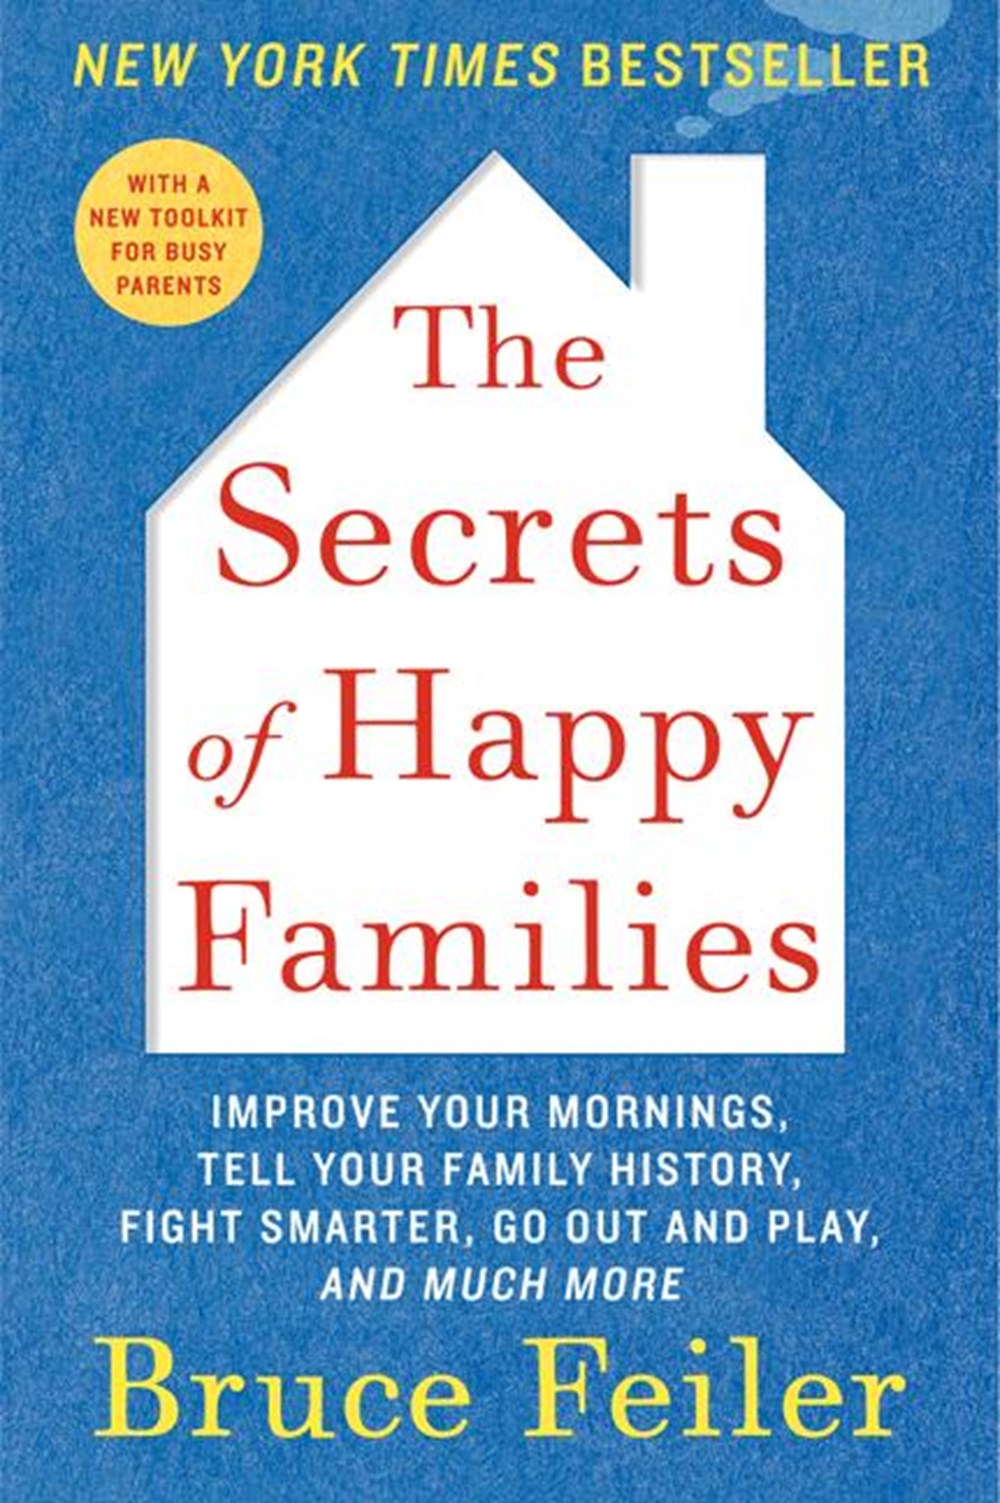 Secrets of Happy Families: Improve Your Mornings, Tell Your Family History, Fight Smarter, Go Out an